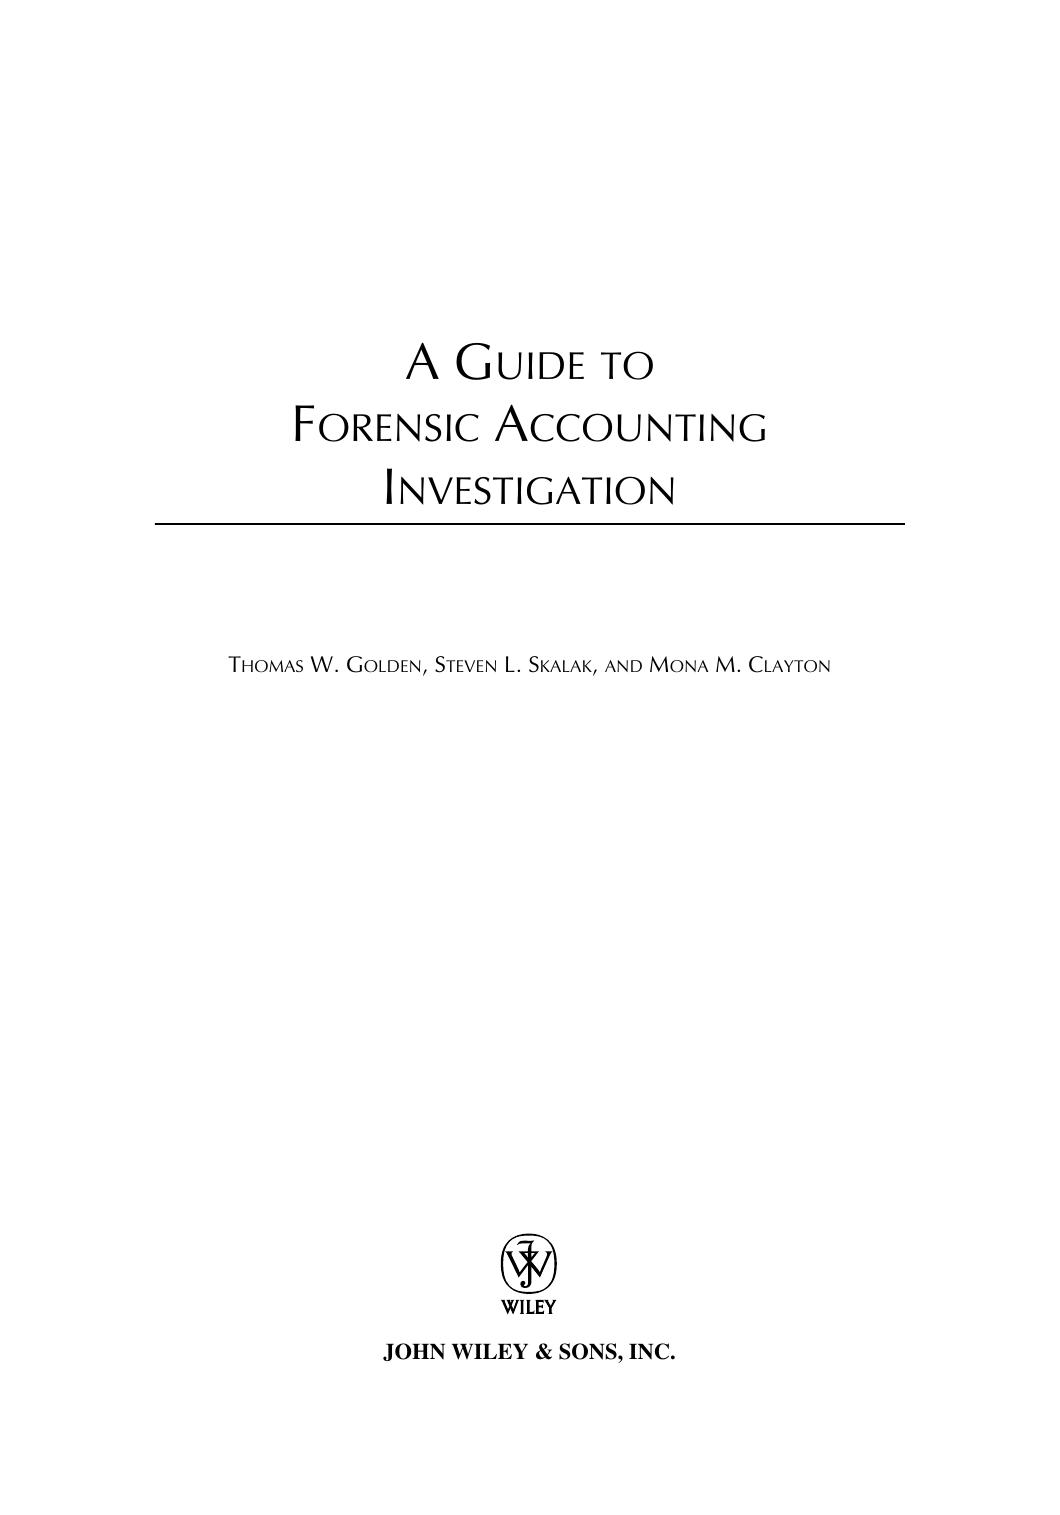 A Guide to Forensic Accounting Investigation 2006